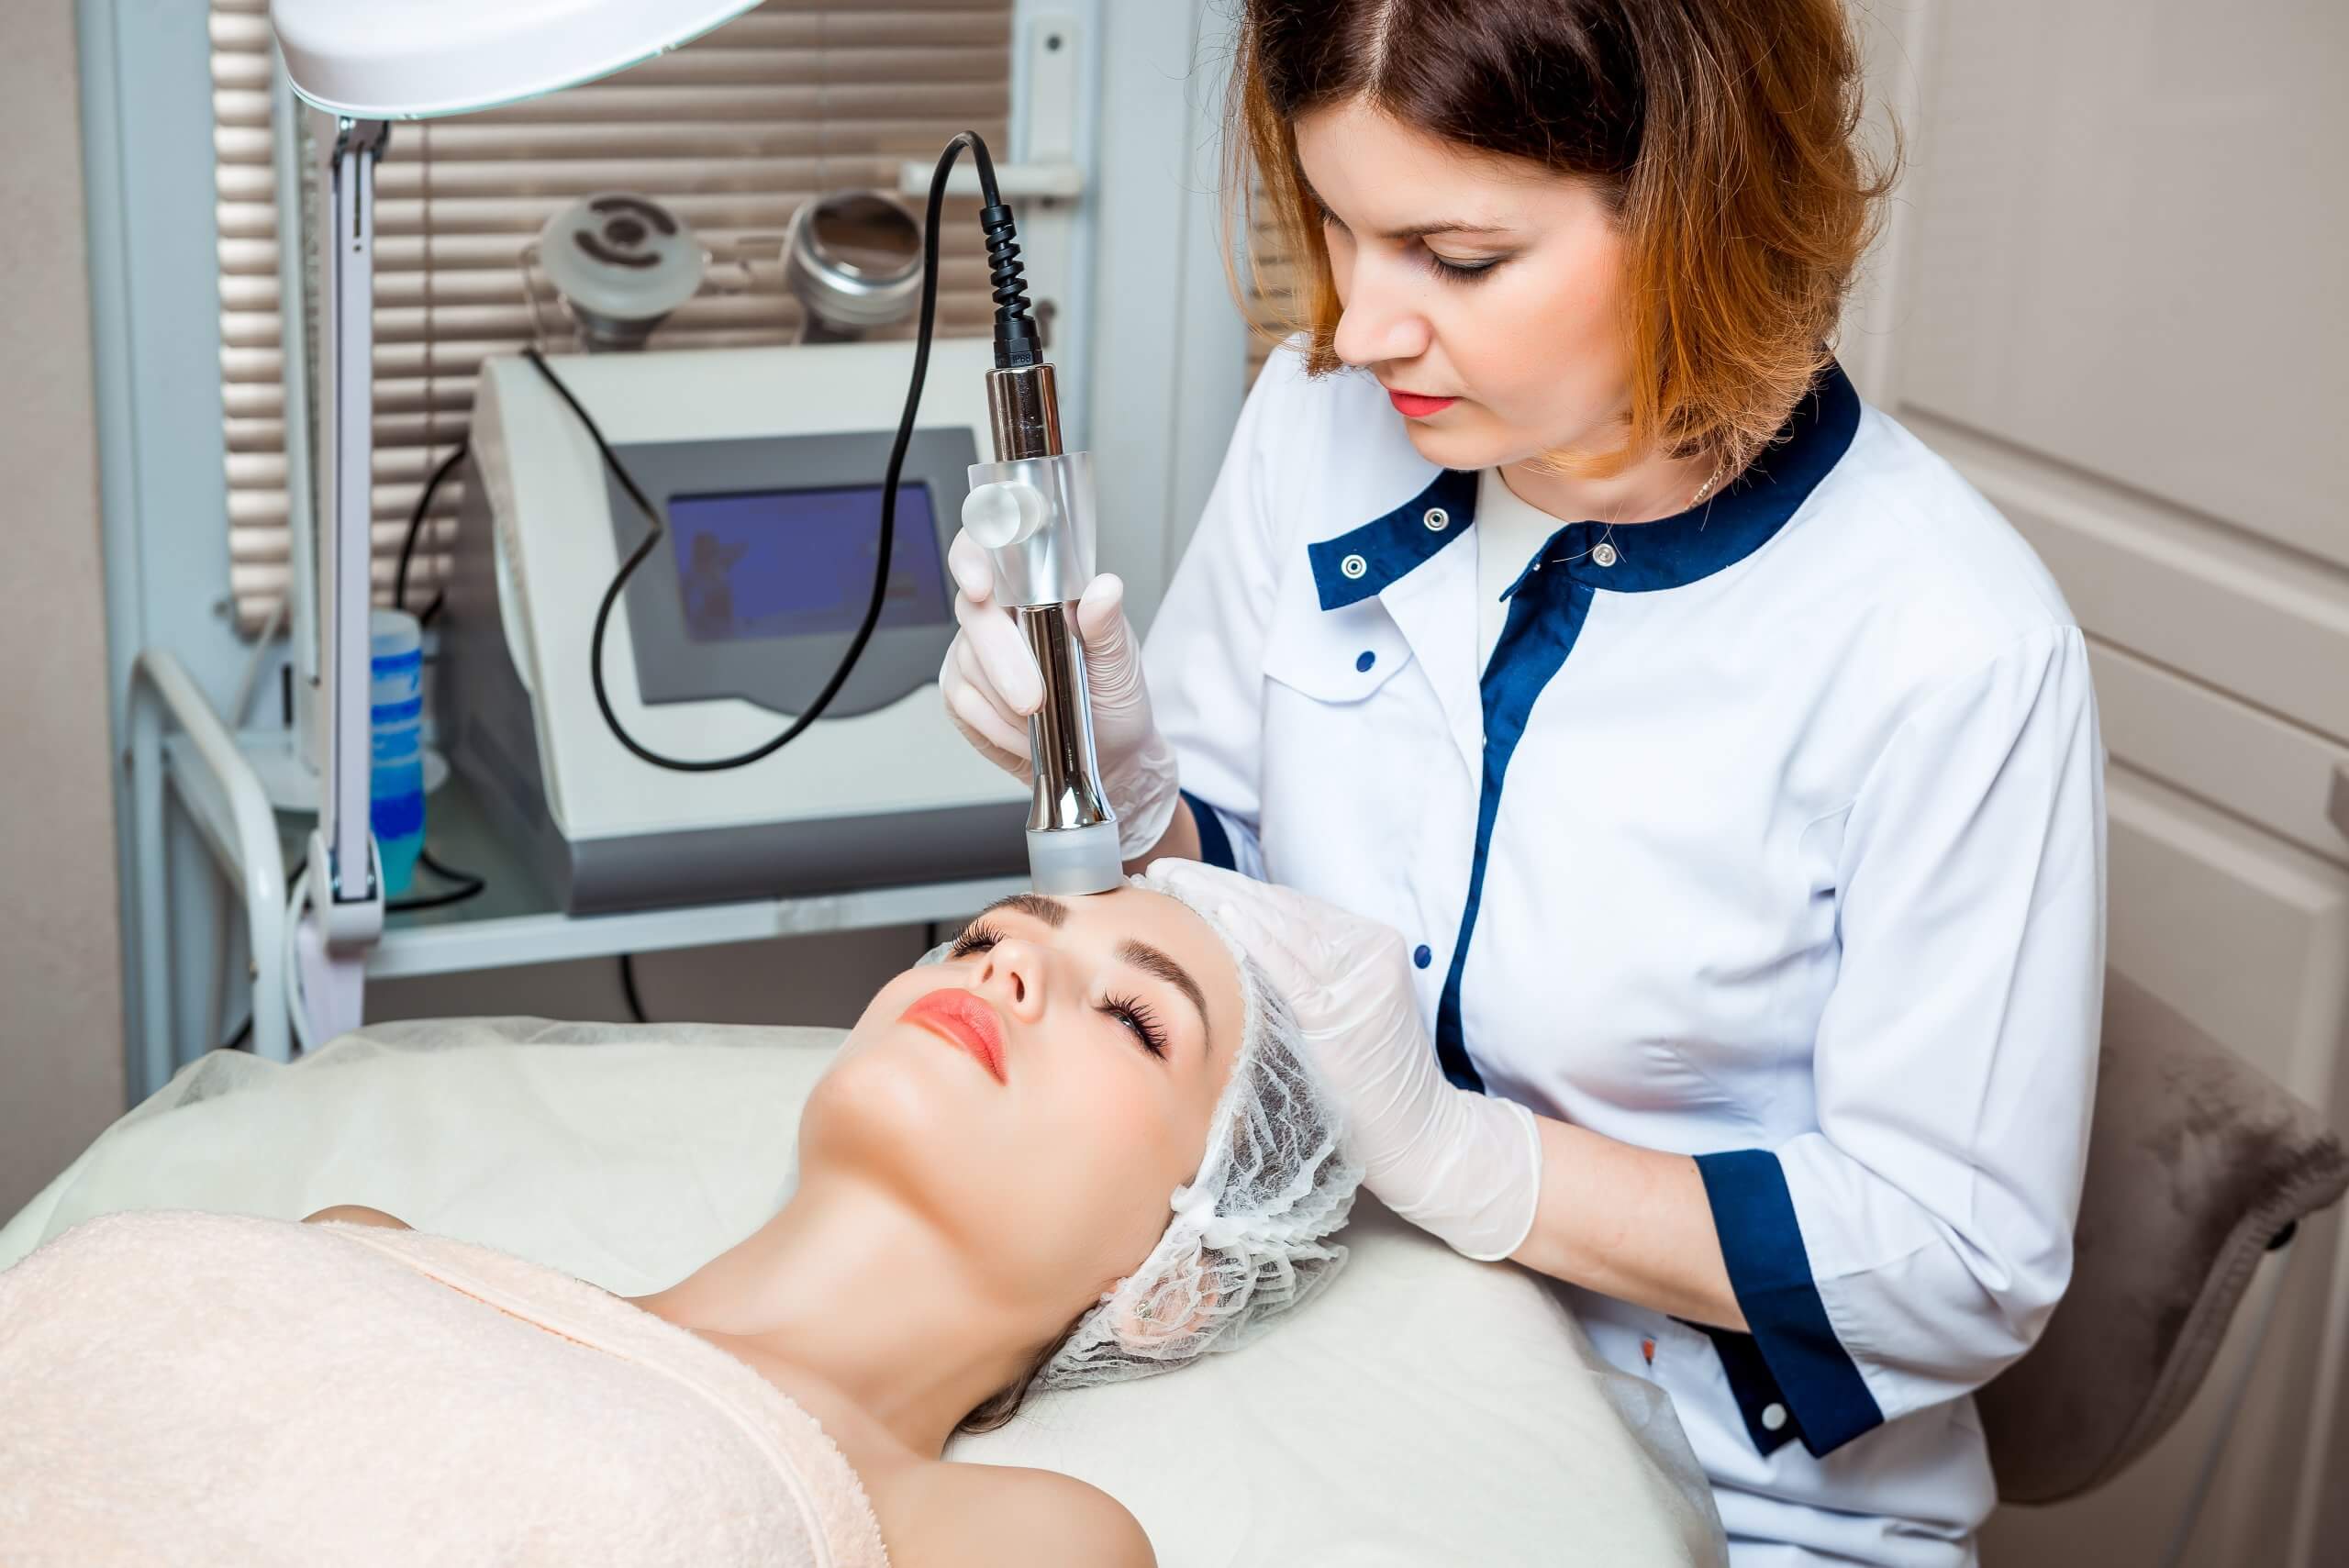 cosmetic laser technician schools in Chicago teach you to perform cosmetic laser treatments